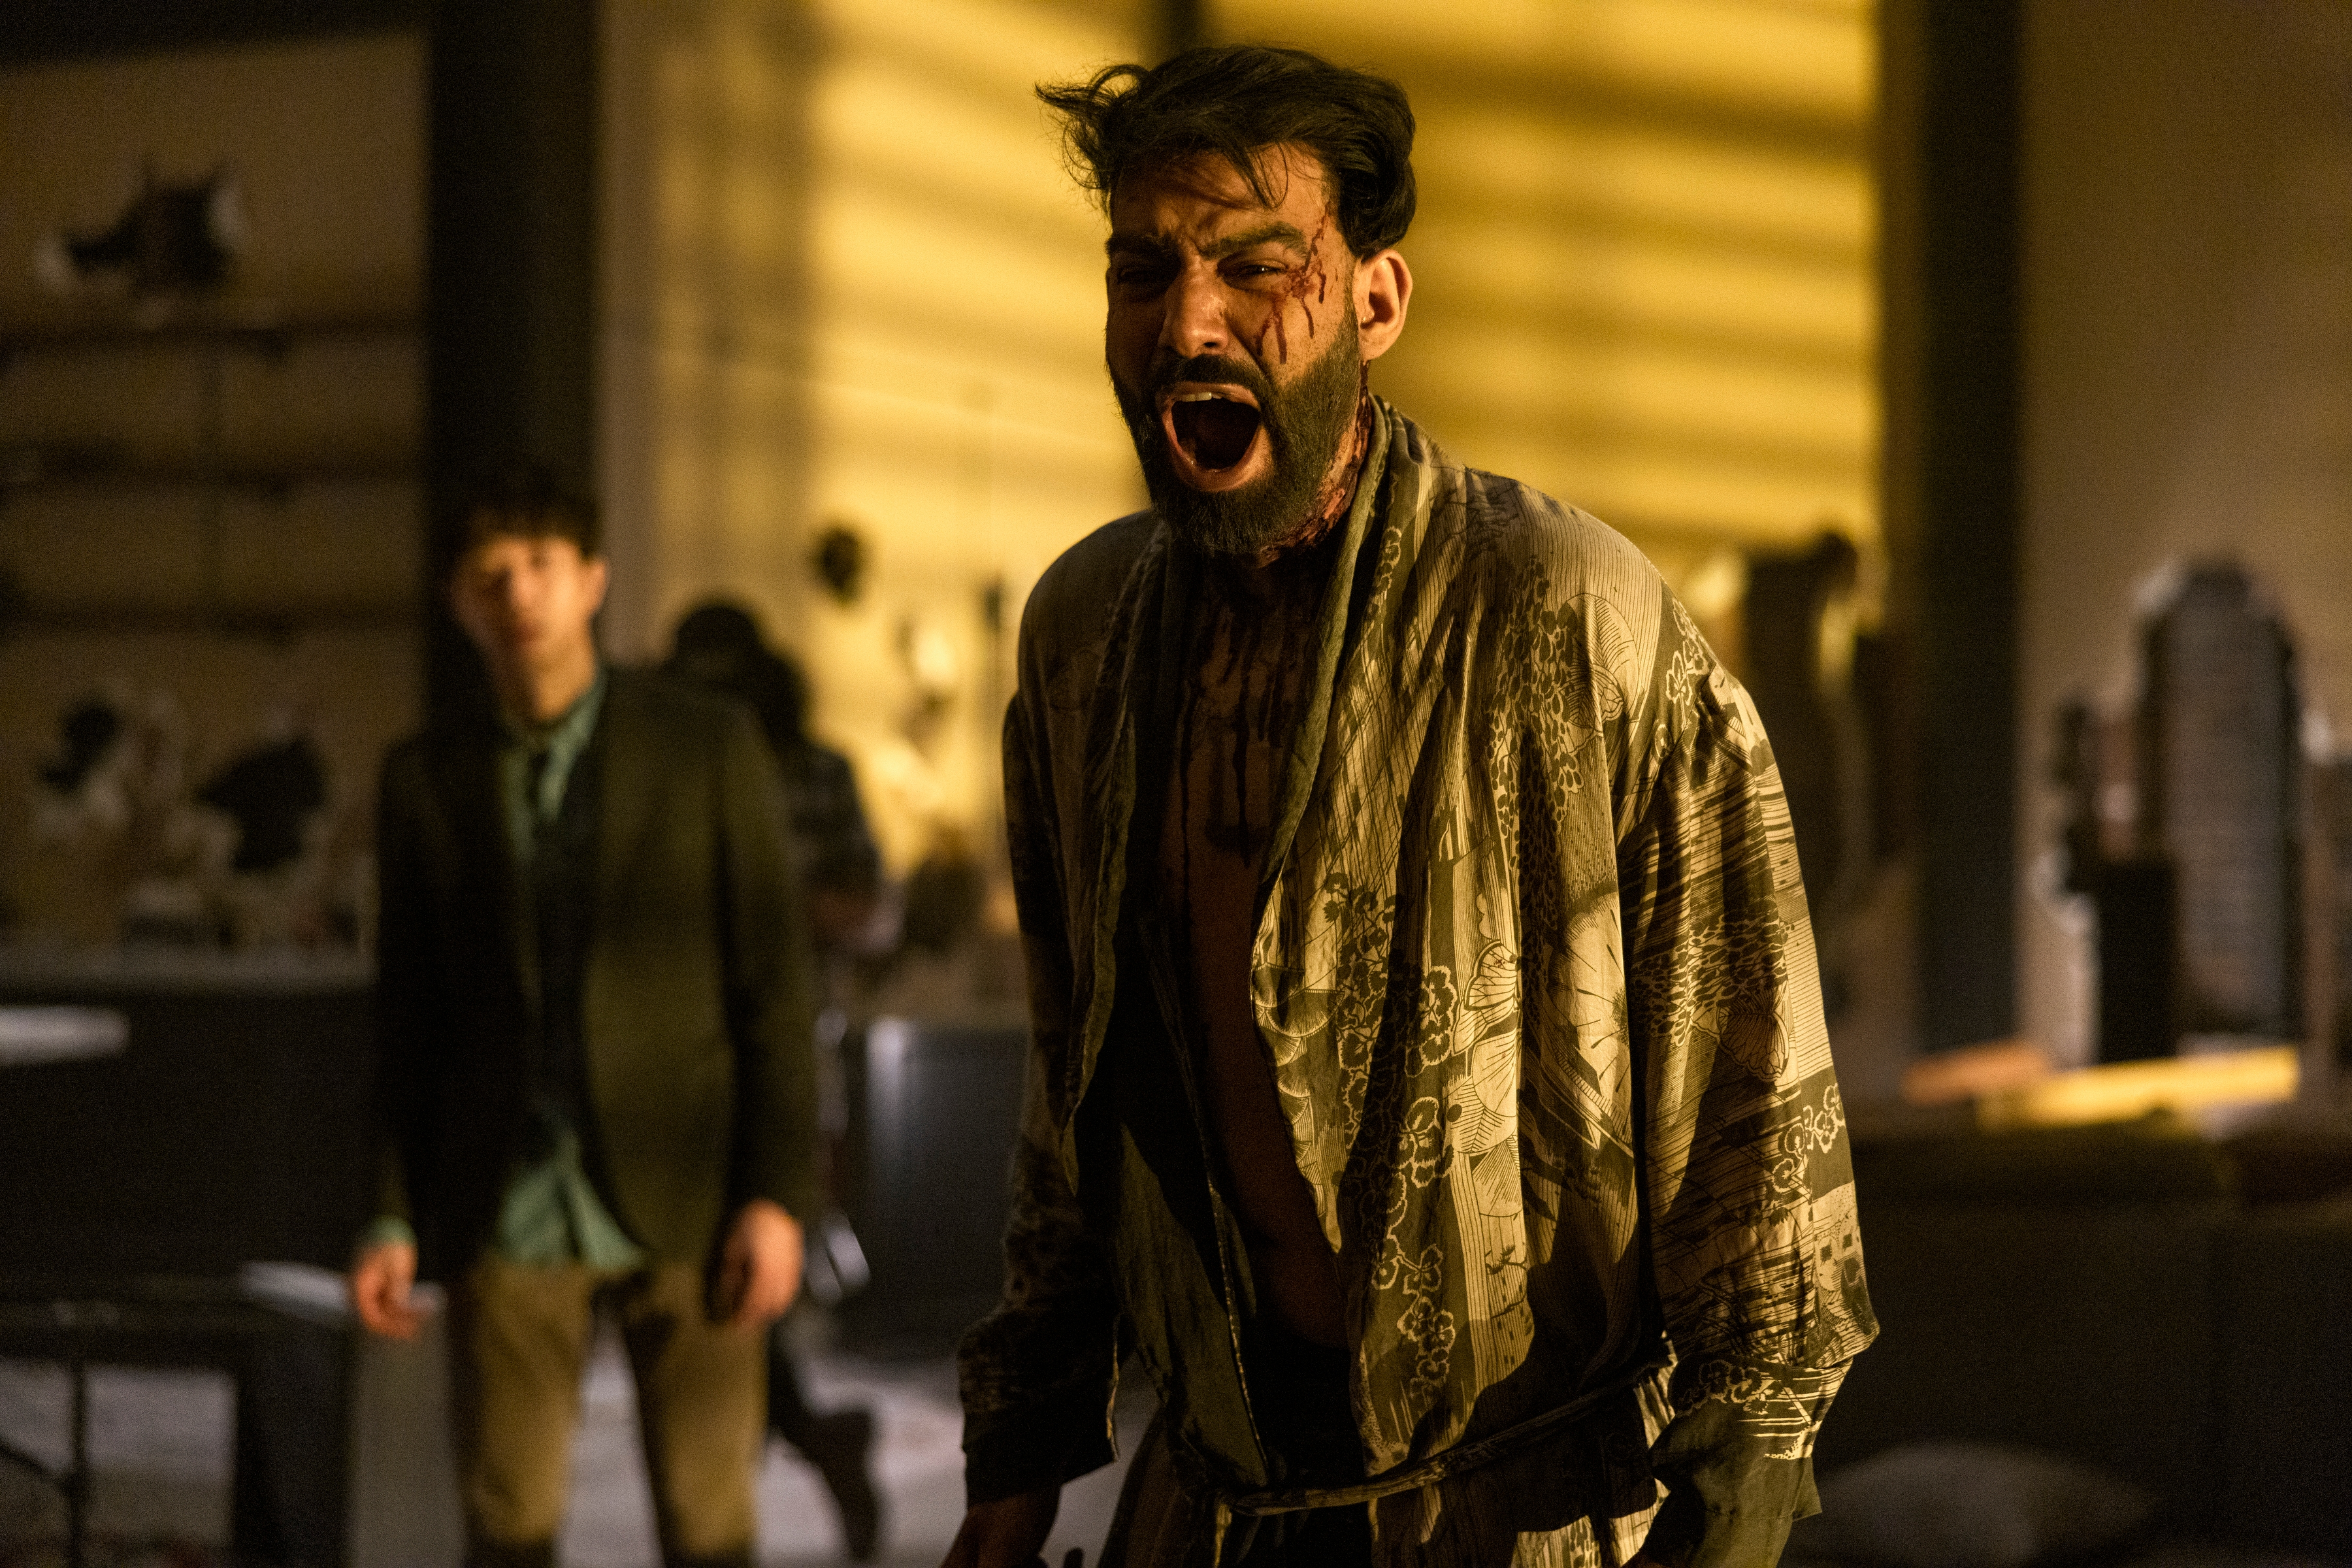 (L-R) Daniel Jun as Julius, Rahul Kohli as Napoleon Usher screaming in a robe covered in blood in The Fall of the House of Usher.